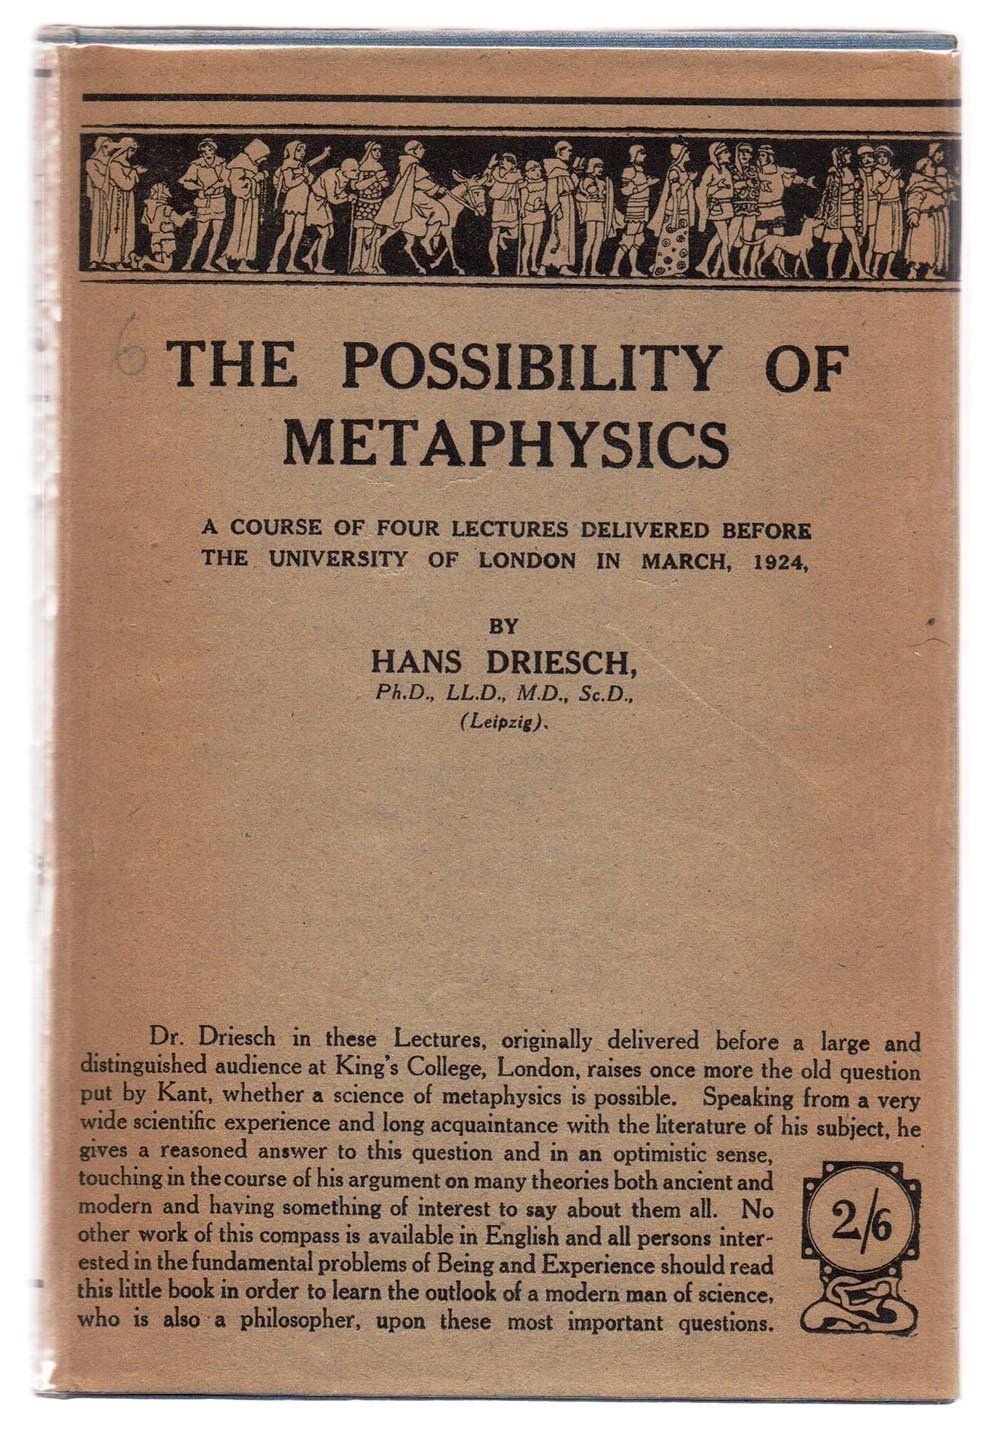 The Possibility of Metaphysics: A Course in Four Lectures Delivered Before the University of London in March, 1924